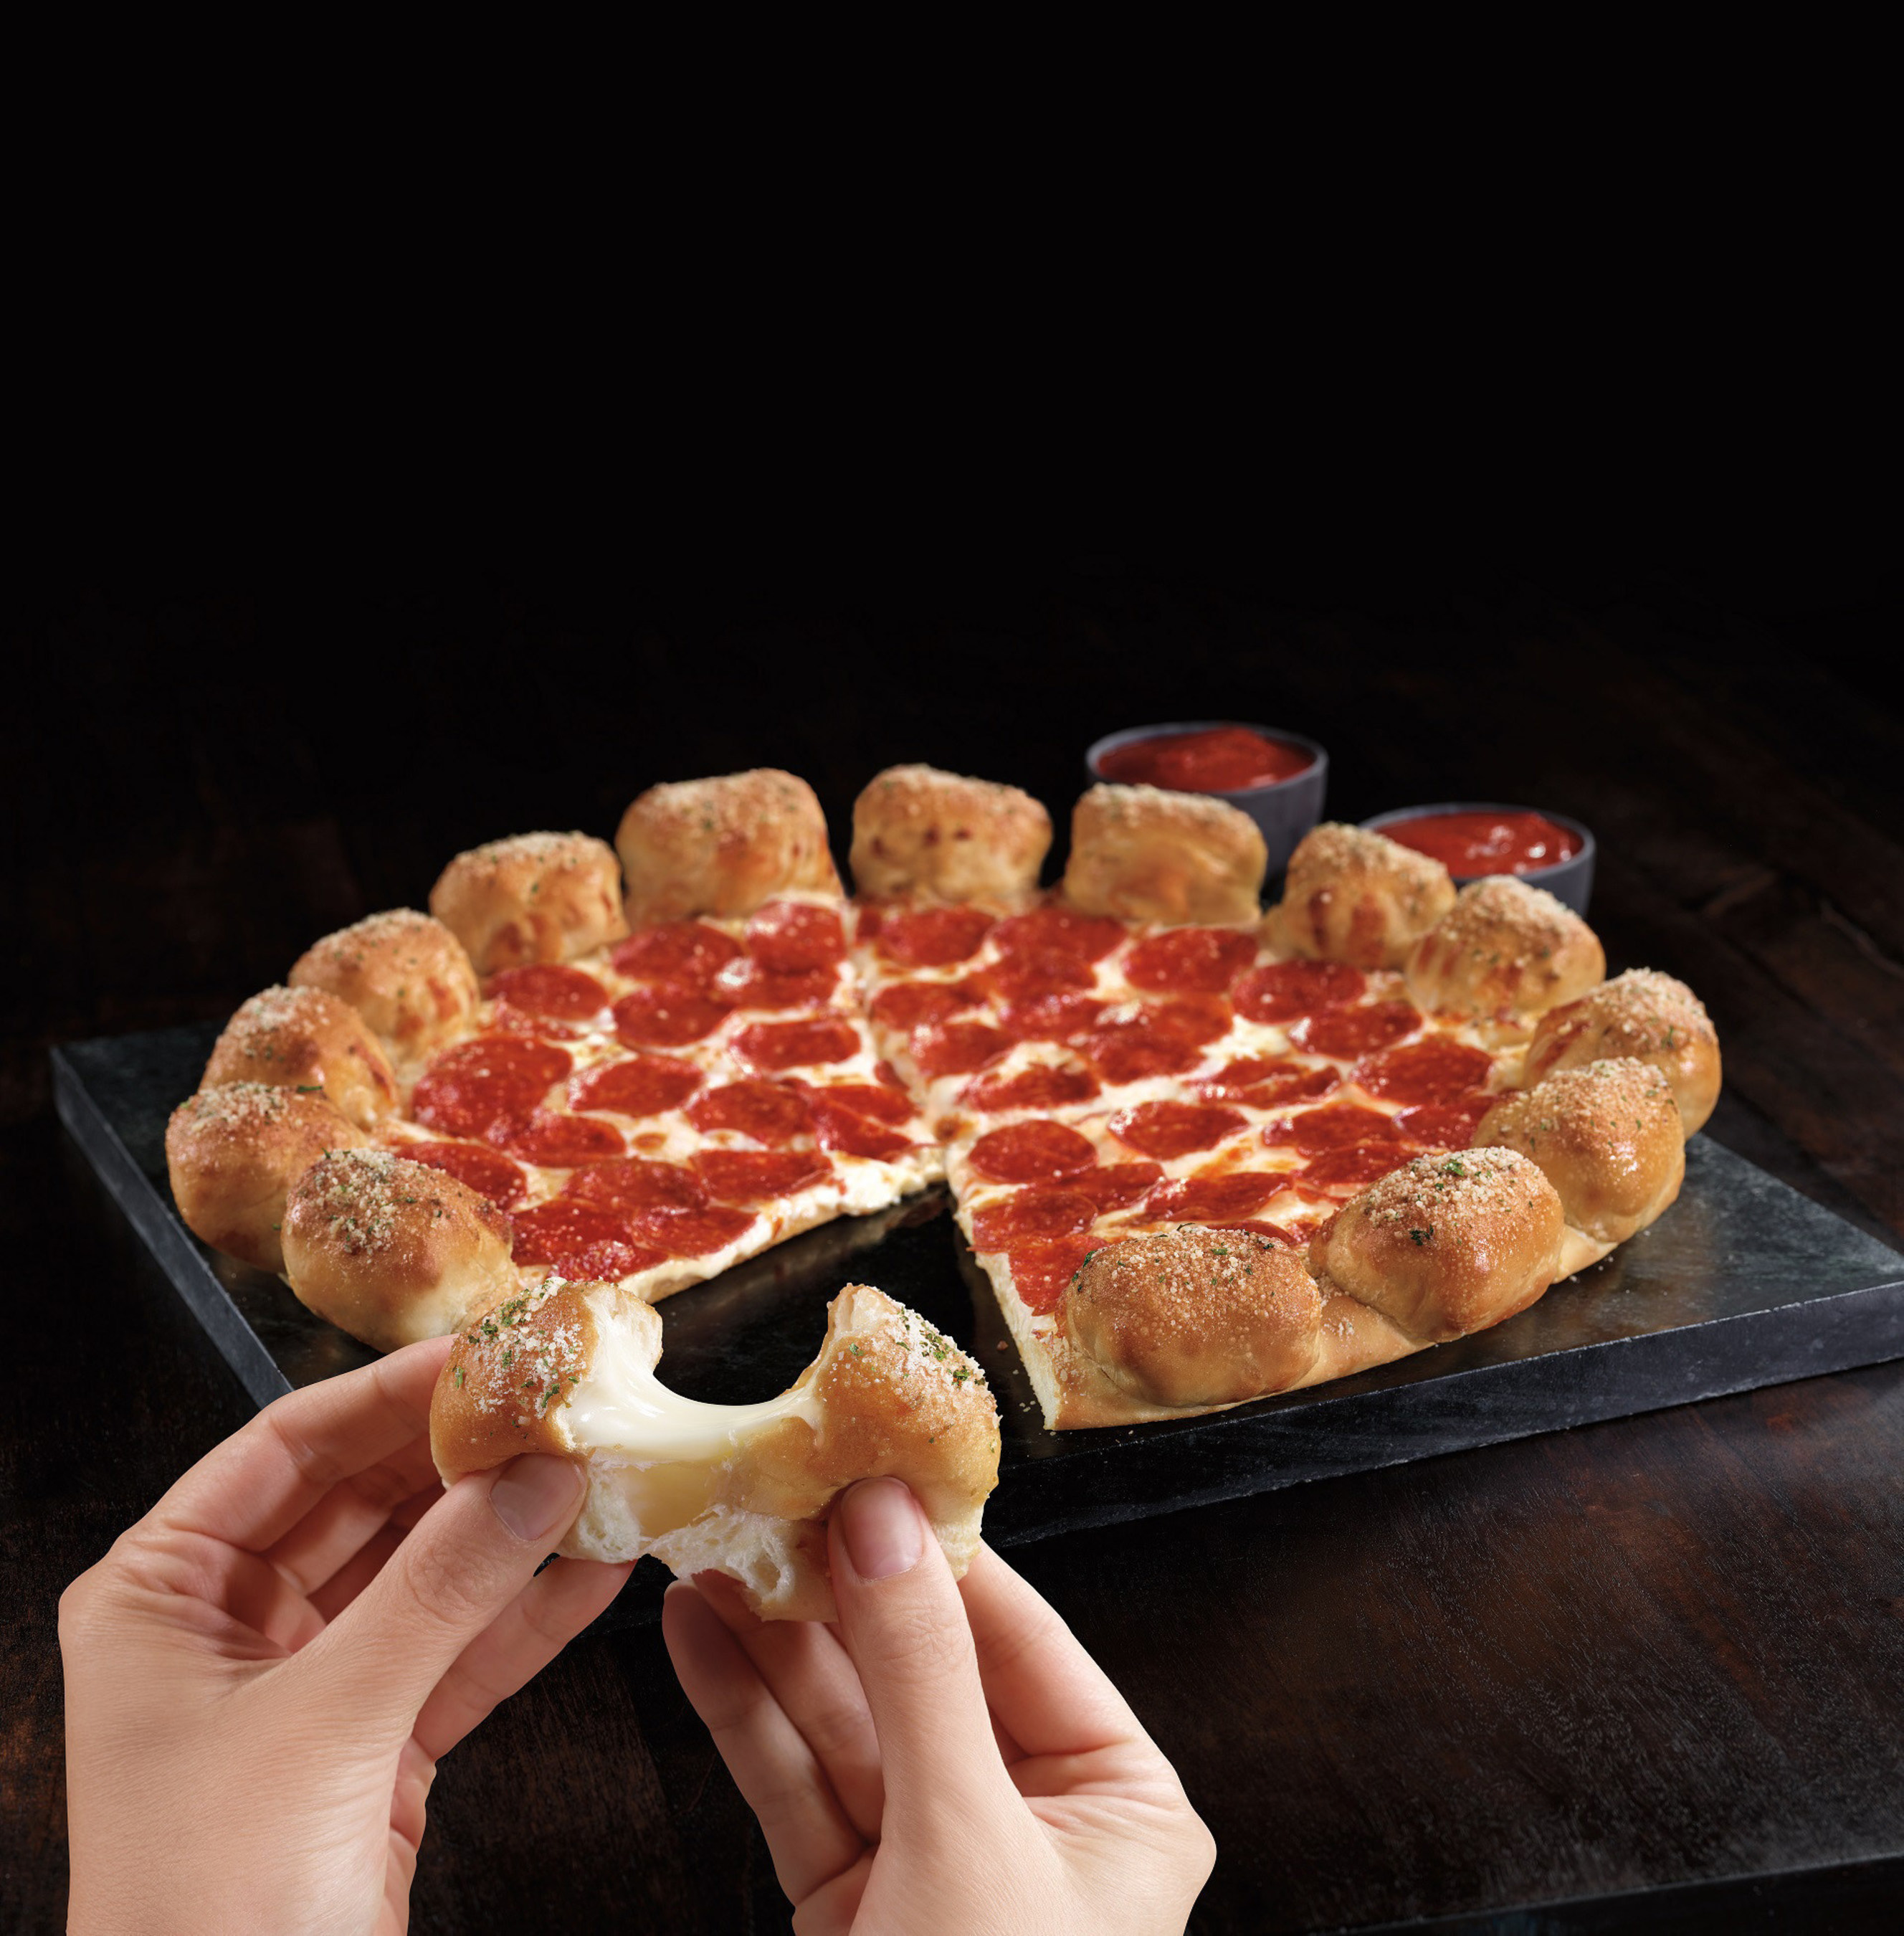 Pizza Hut introduces new Stuffed Garlic Knots Pizza, combining an appetizer and pizza all in one